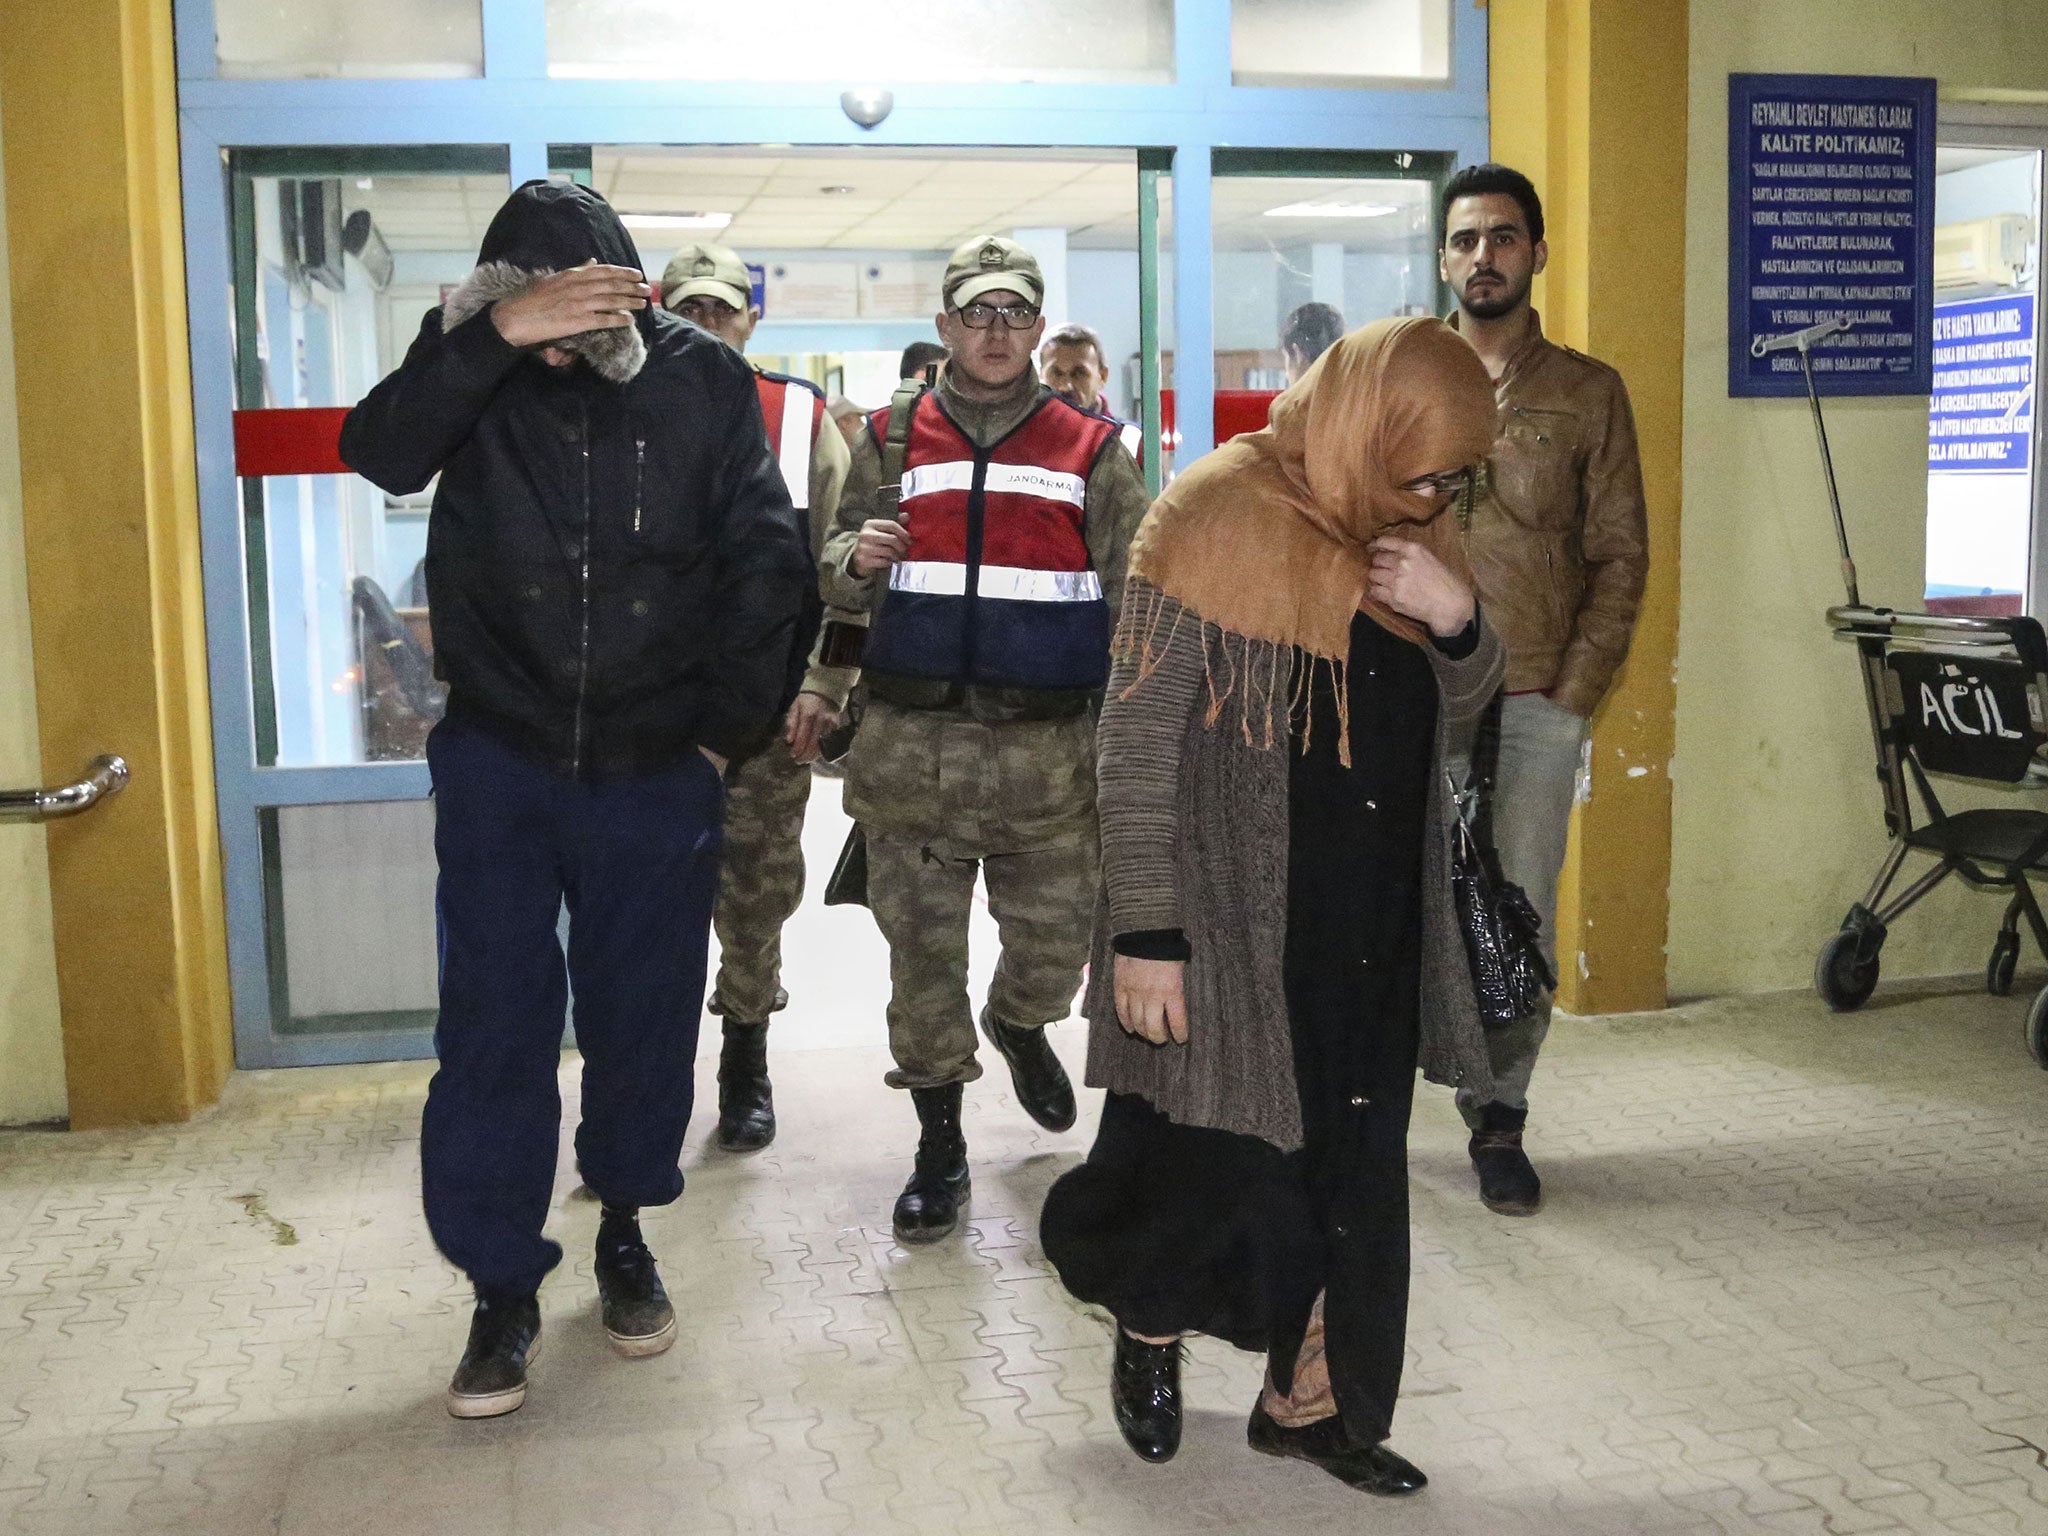 The family, who have since been released without charge in Britain, leave an hospital after they undergo medical check up and fingerprinting in Hatay, southern Turkey